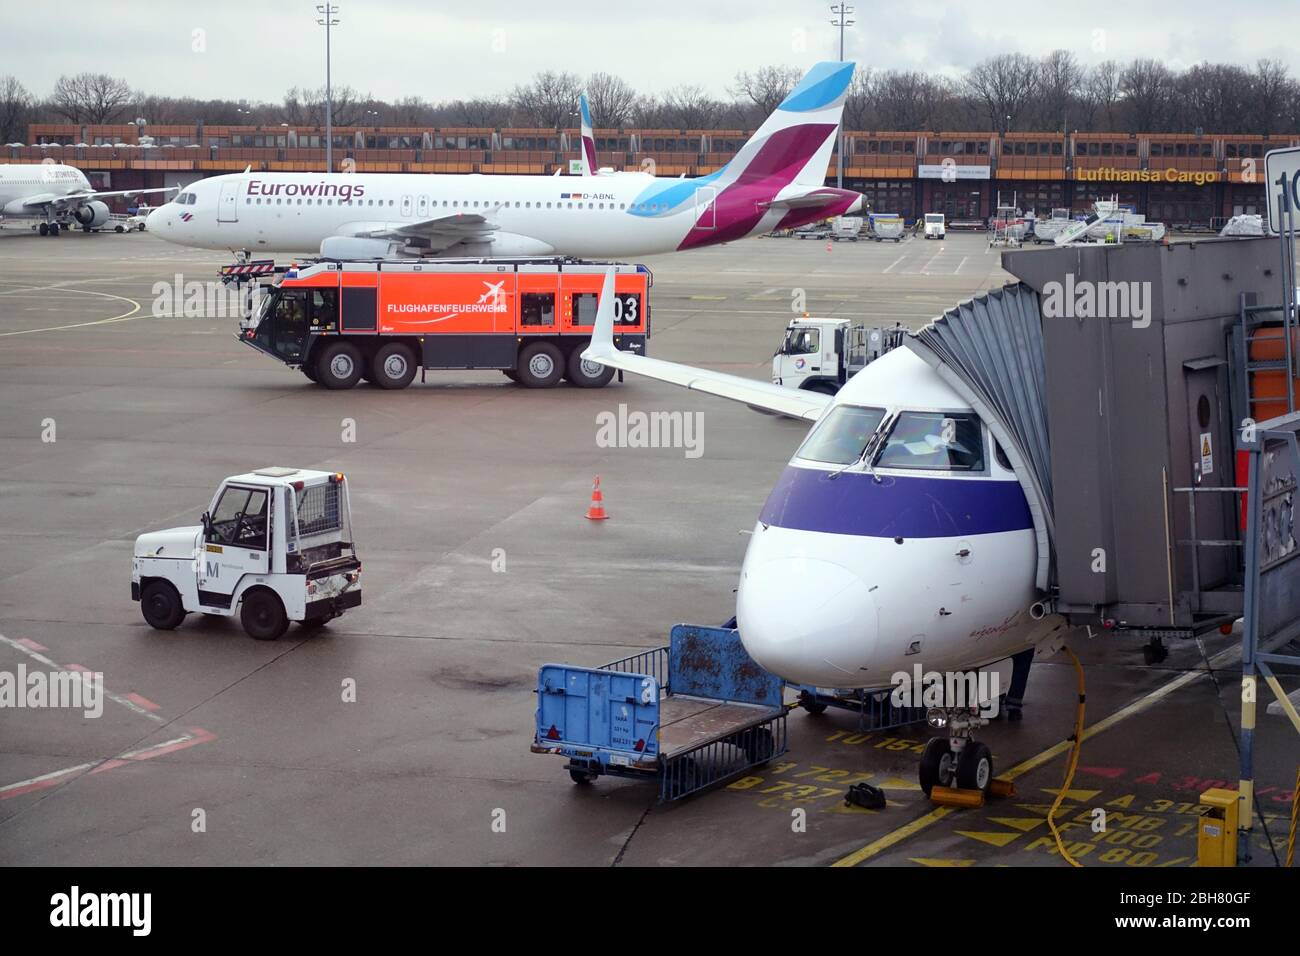 02.12.2019, Berlin, Brandenburg, Germany - Airport fire department on the apron of Tegel Airport. 00S191202D160CAROEX.JPG [MODEL RELEASE: NO, PROPERTY Stock Photo